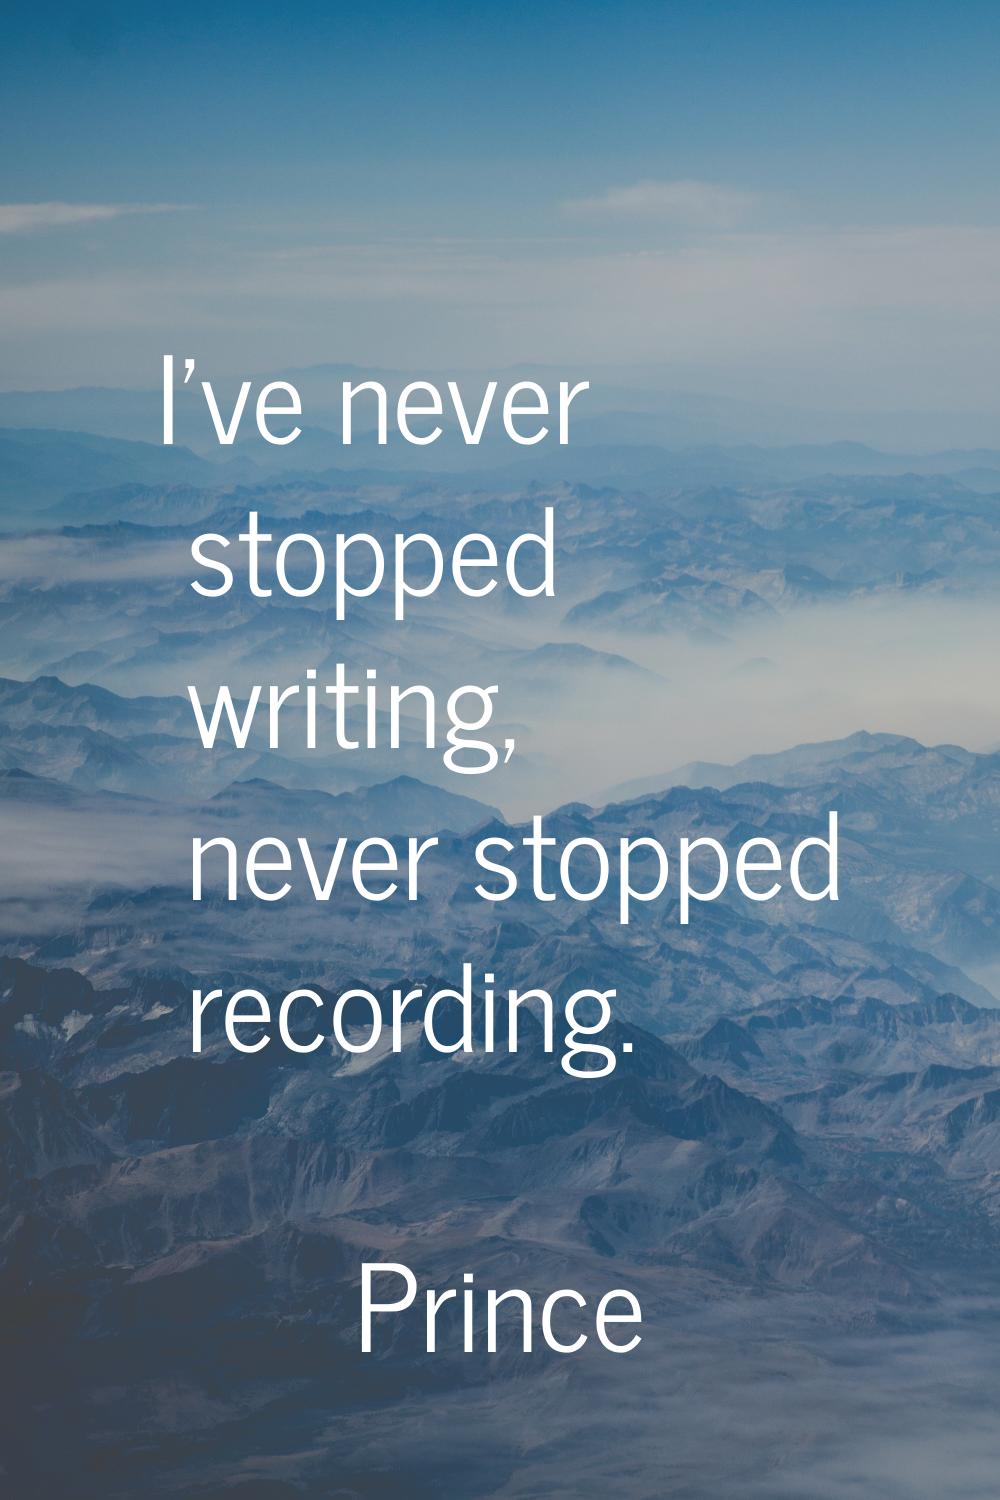 I've never stopped writing, never stopped recording.